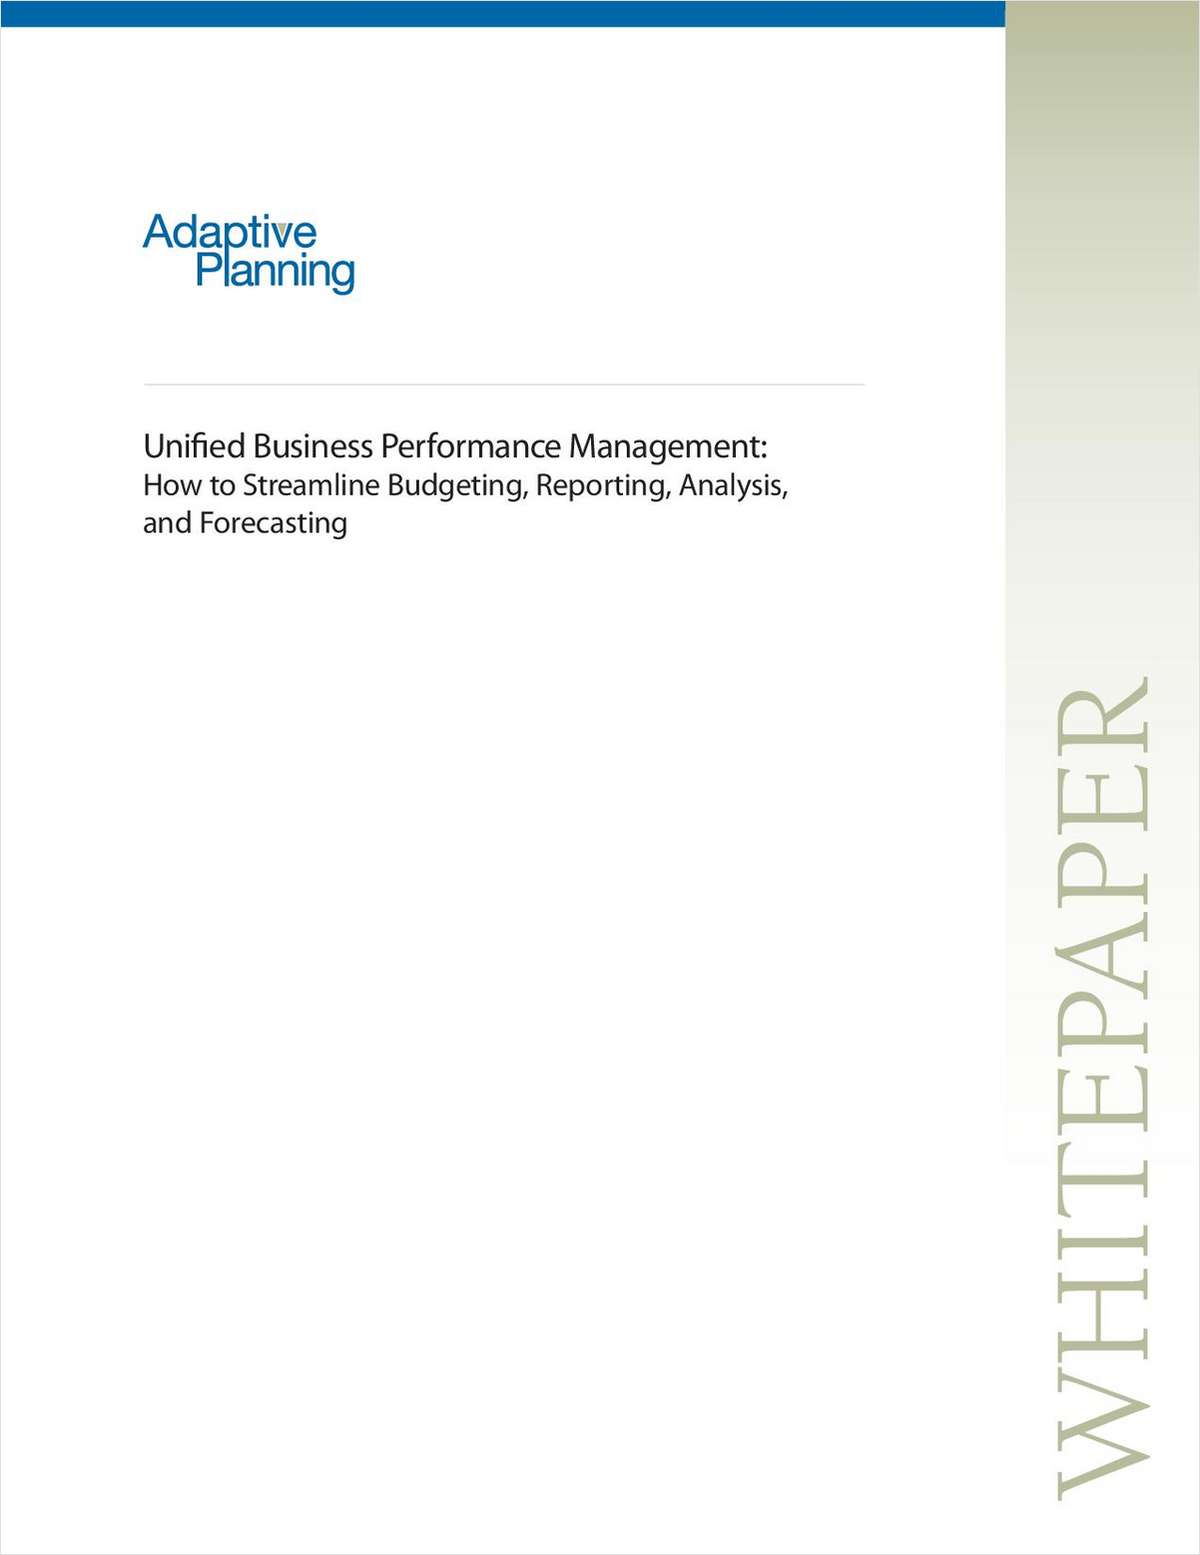 Unified Business Performance Management: How to Streamline Budgeting, Reporting, Analysis and Forecasting